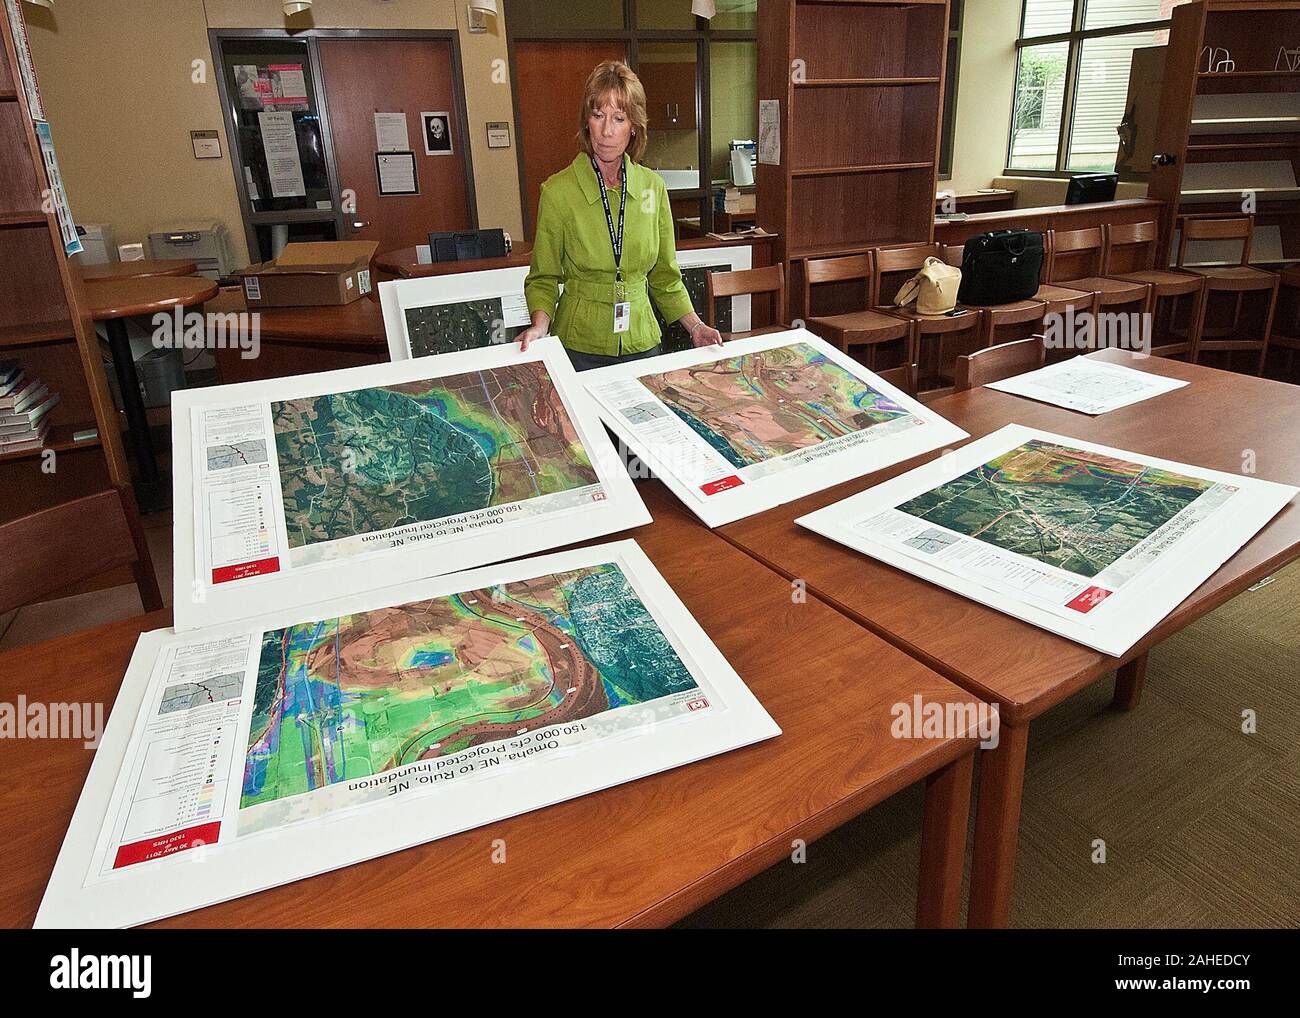 Bobbi Schaaf, Farm Services Agency, District Director, Southwest Iowa prepares An Army Corps of Engineers Inundation Maps representing the possible coverage of the Missouri River floodwaters prior to a town hall meeting held buy Agriculture Secretary Tom Vilsack at the Glenwood Community High School in Glenwood, Iowa Thur., June 16, 2011. Farmers, local and regional media listened and questioned Secretary Vilsack on the cause of the floodwaters along the Missouri River affecting Iowa and Nebraska. Secretary Vilsack offered advice and assistance available through the United States Department of Stock Photo